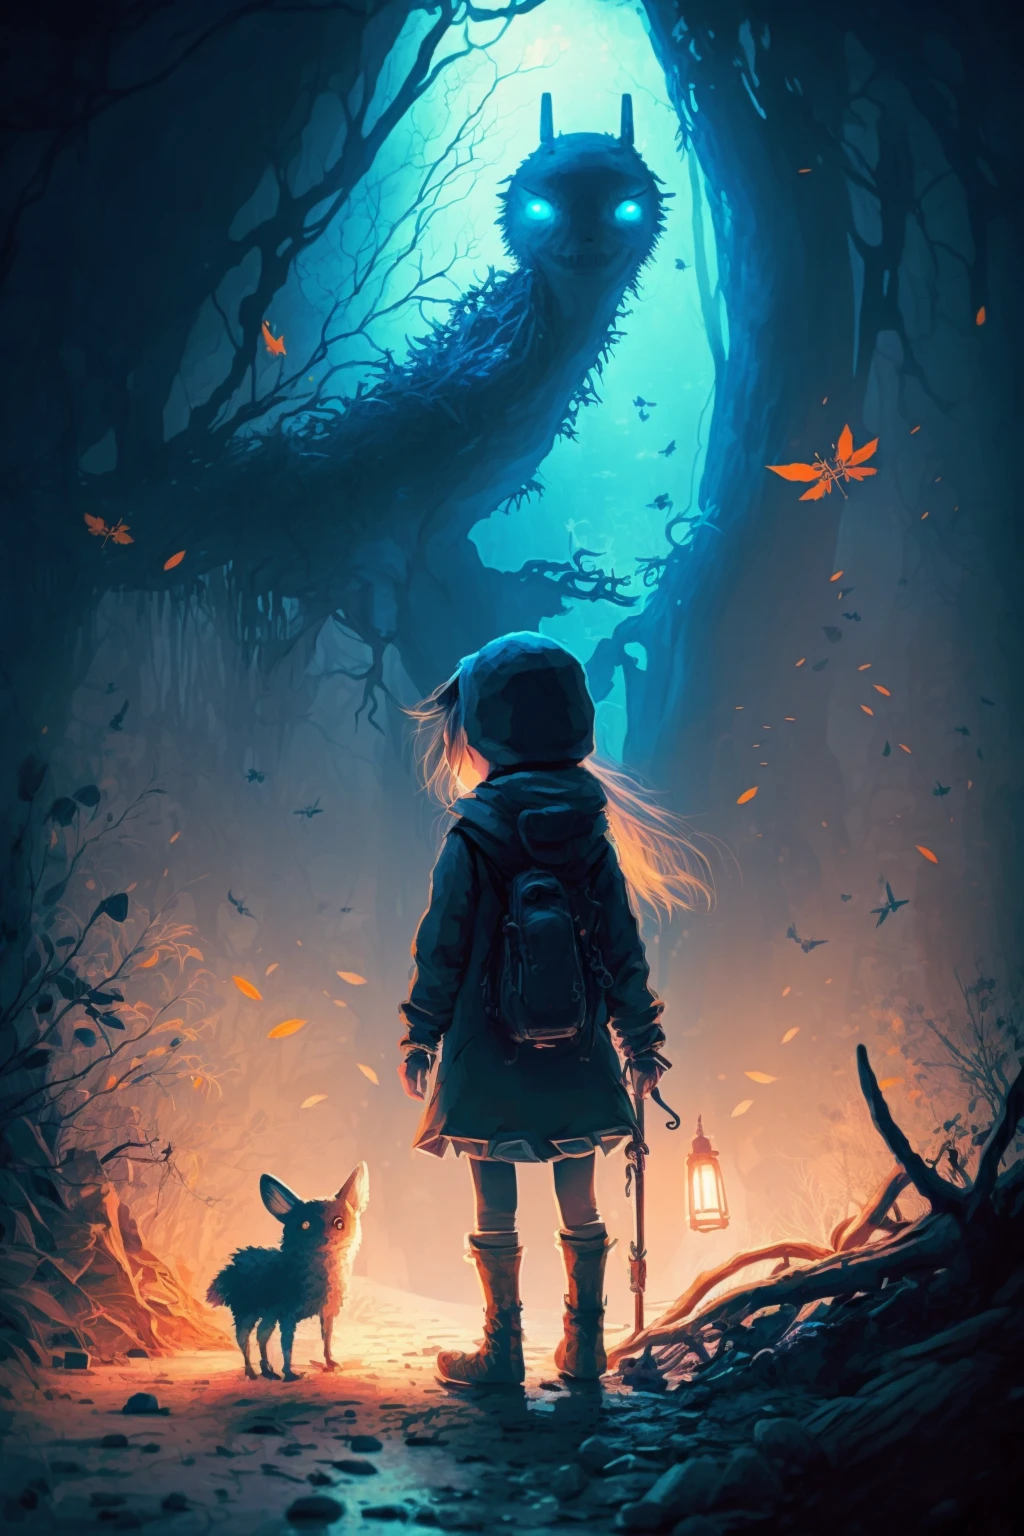 MrNoMbre_a_cute_kid_with_adventure_outfit_and_his_mystical_frie_0fce5c27-96cc-4793-ab1b-11977171a368.webp